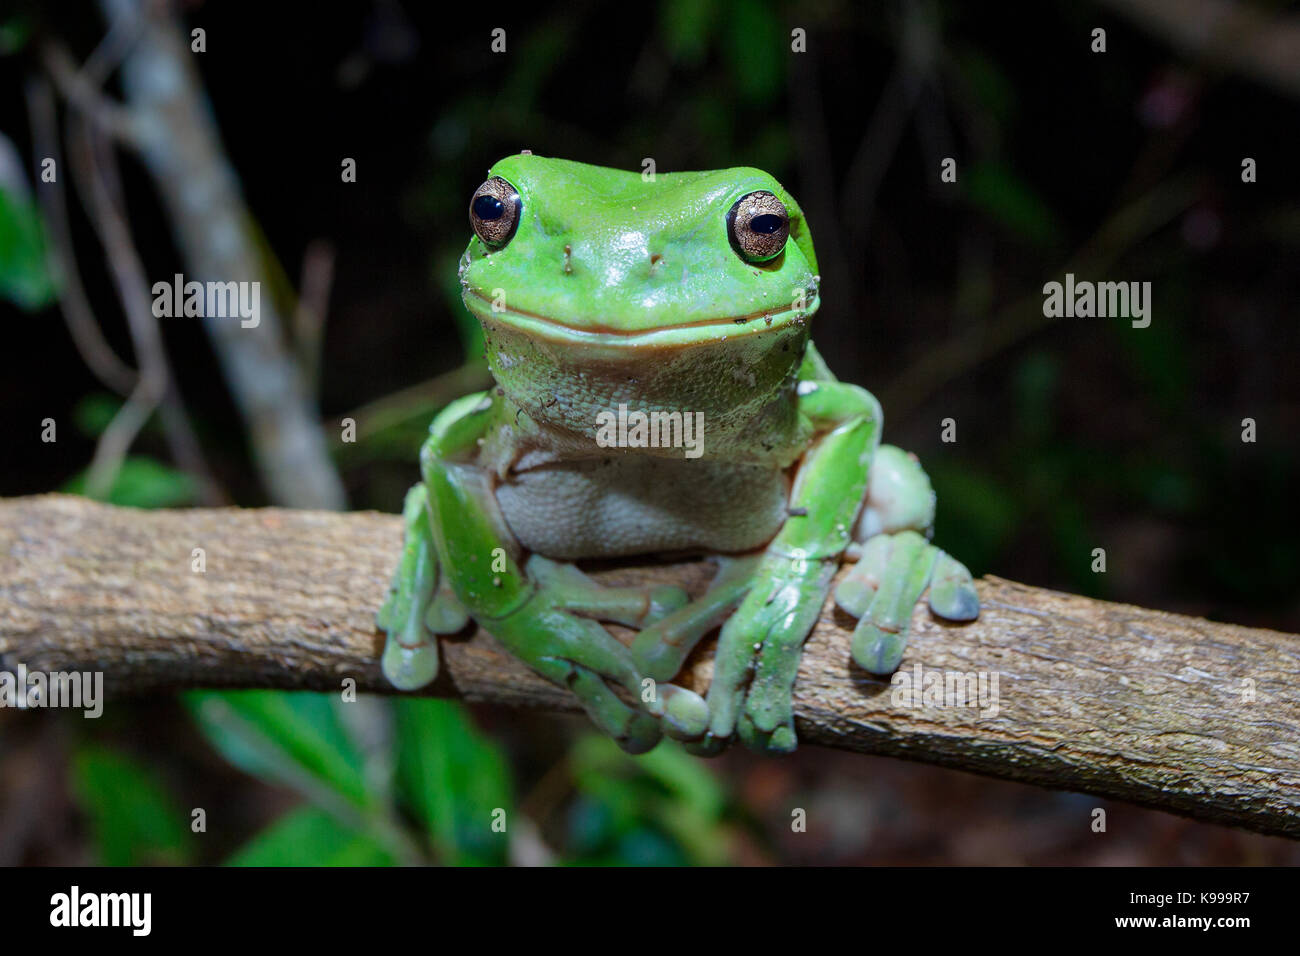 Australian Green Tree Frog High Resolution Stock Photography and Images -  Alamy